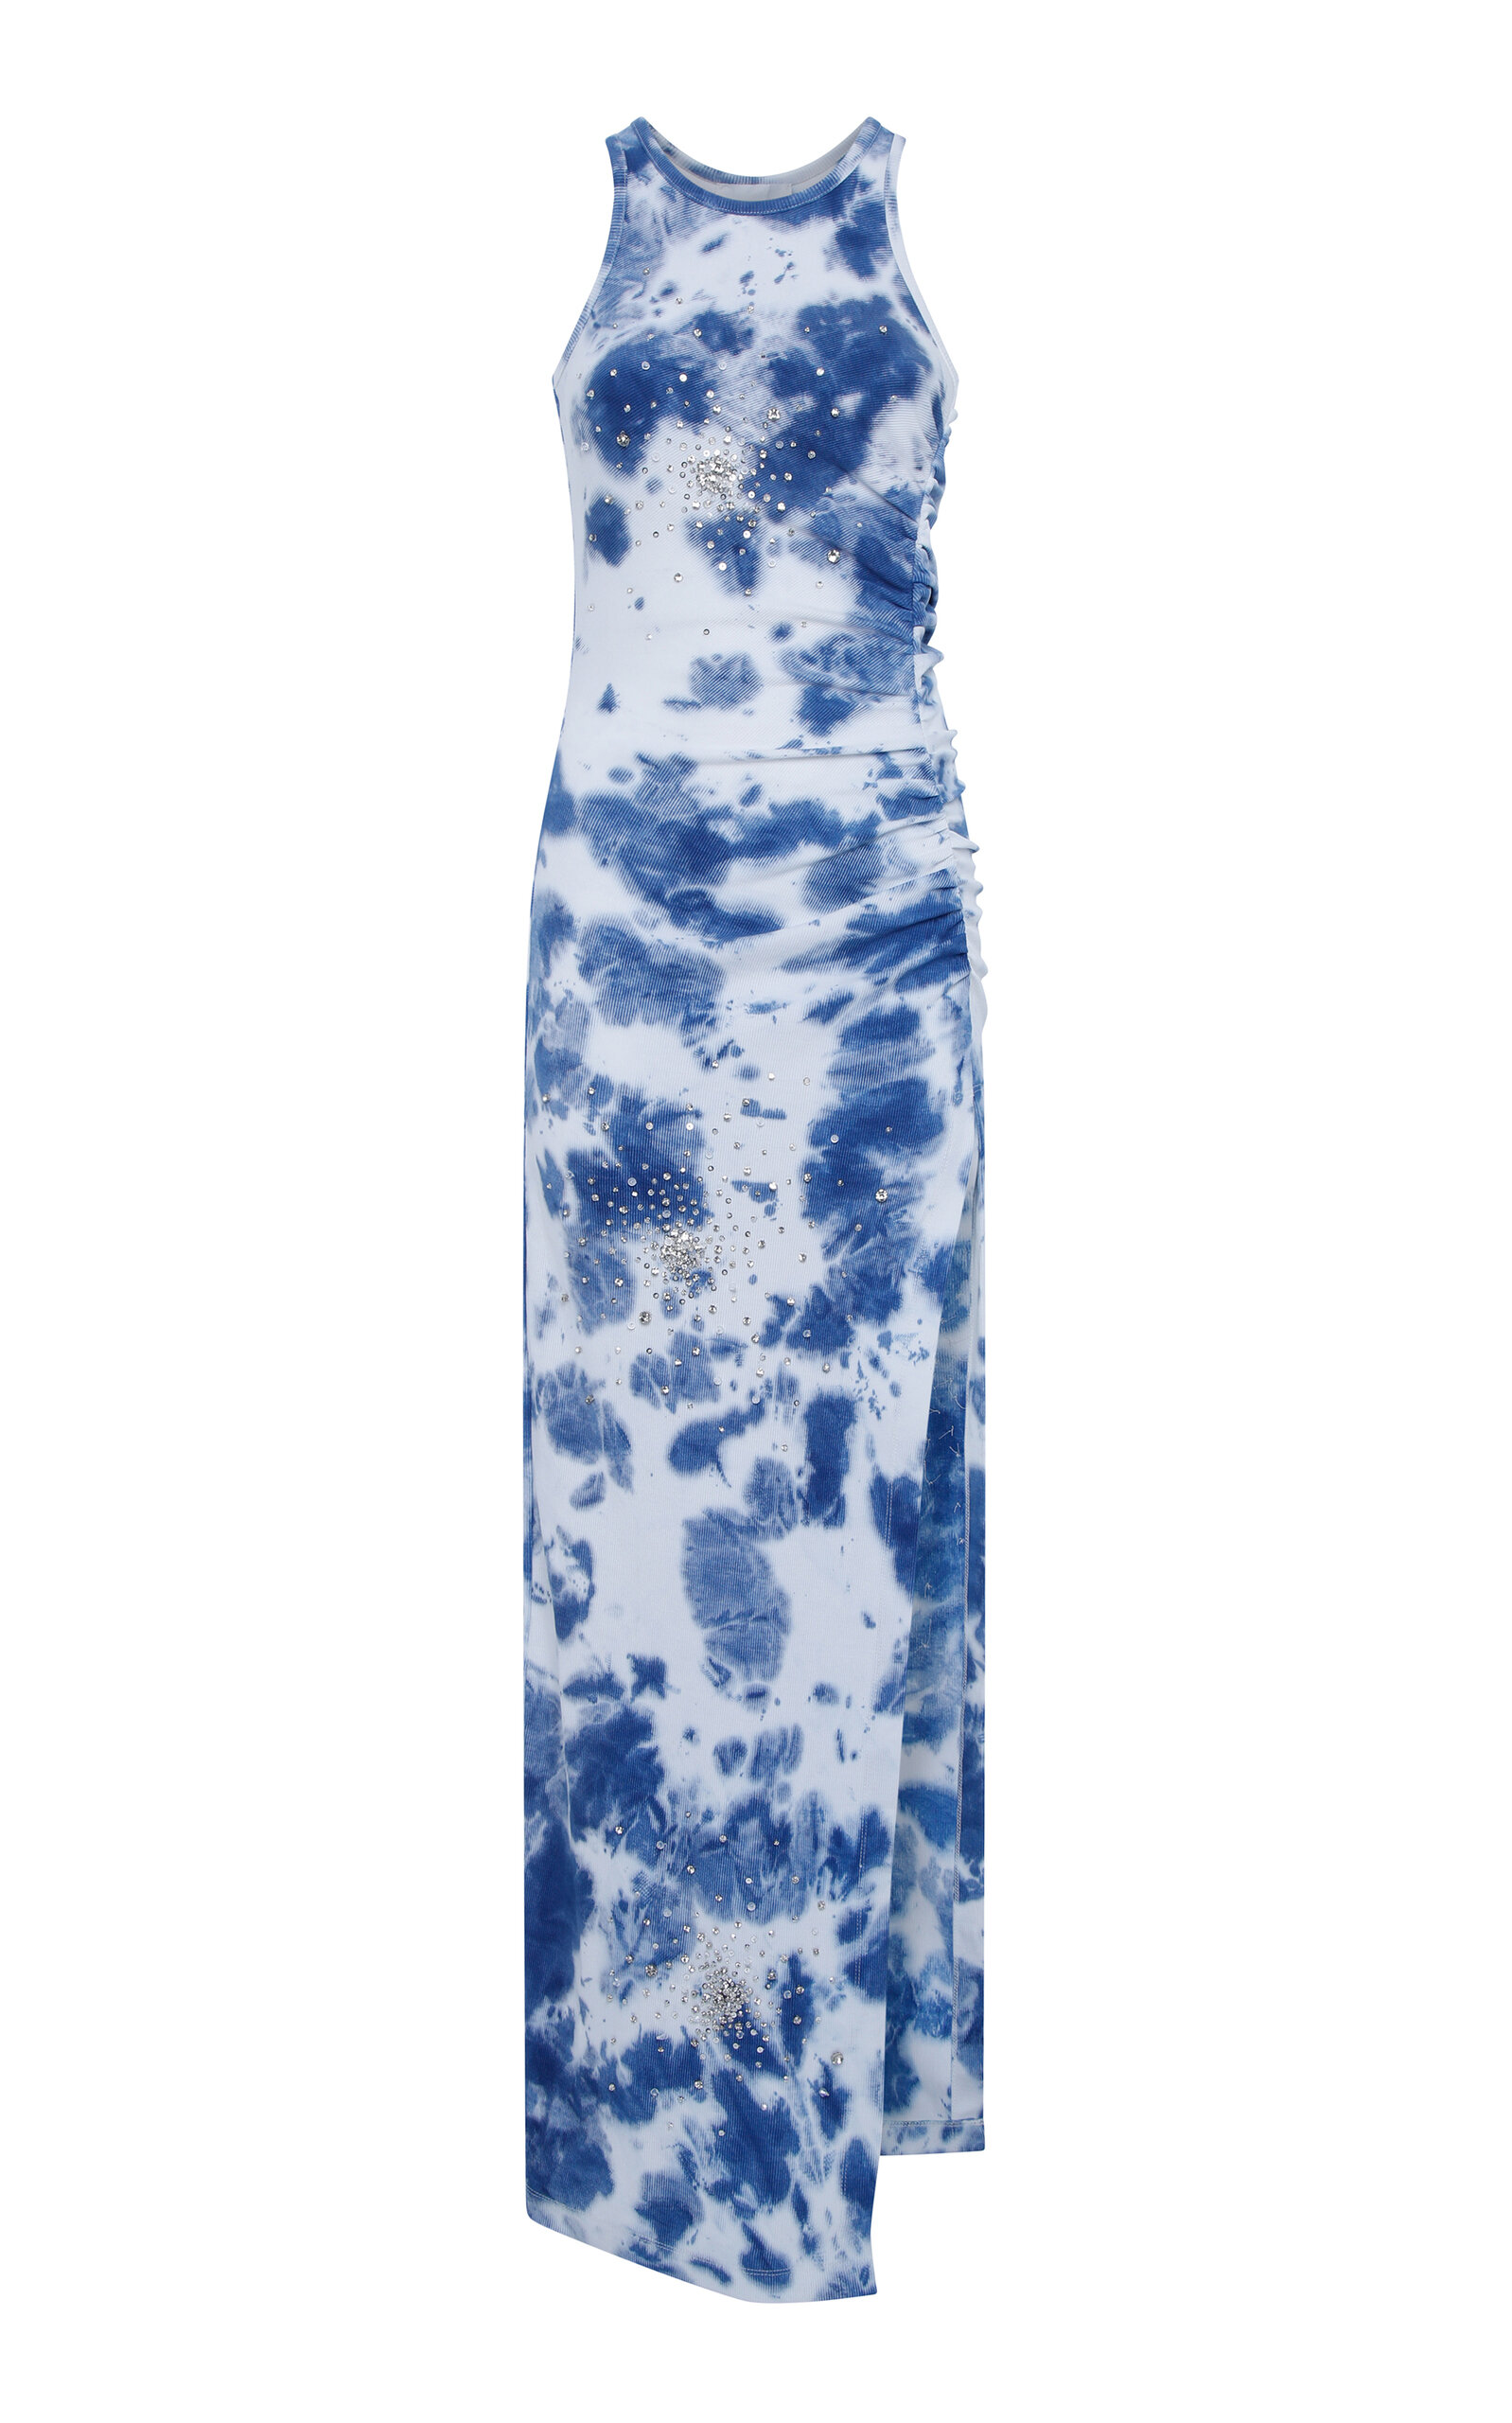 Exclusive Crystal-Embellished Tie-Dyed Cotton Midi Dress